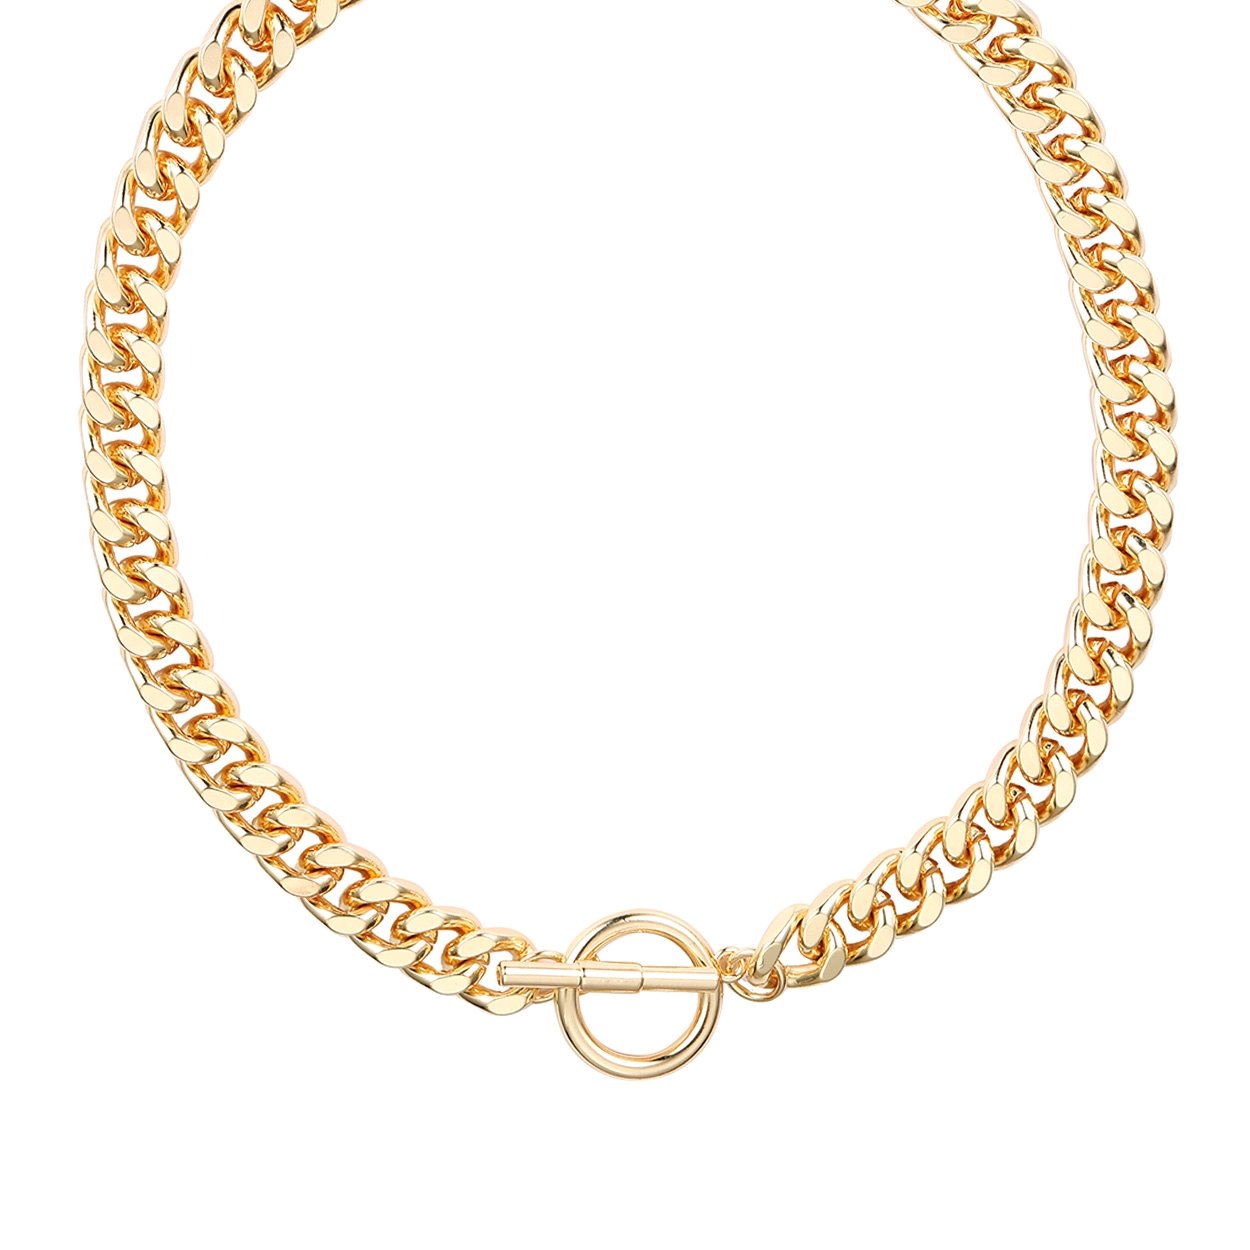 Stunning Polished Gold Tone Chunky Curb Link Chain Toggle Clasp